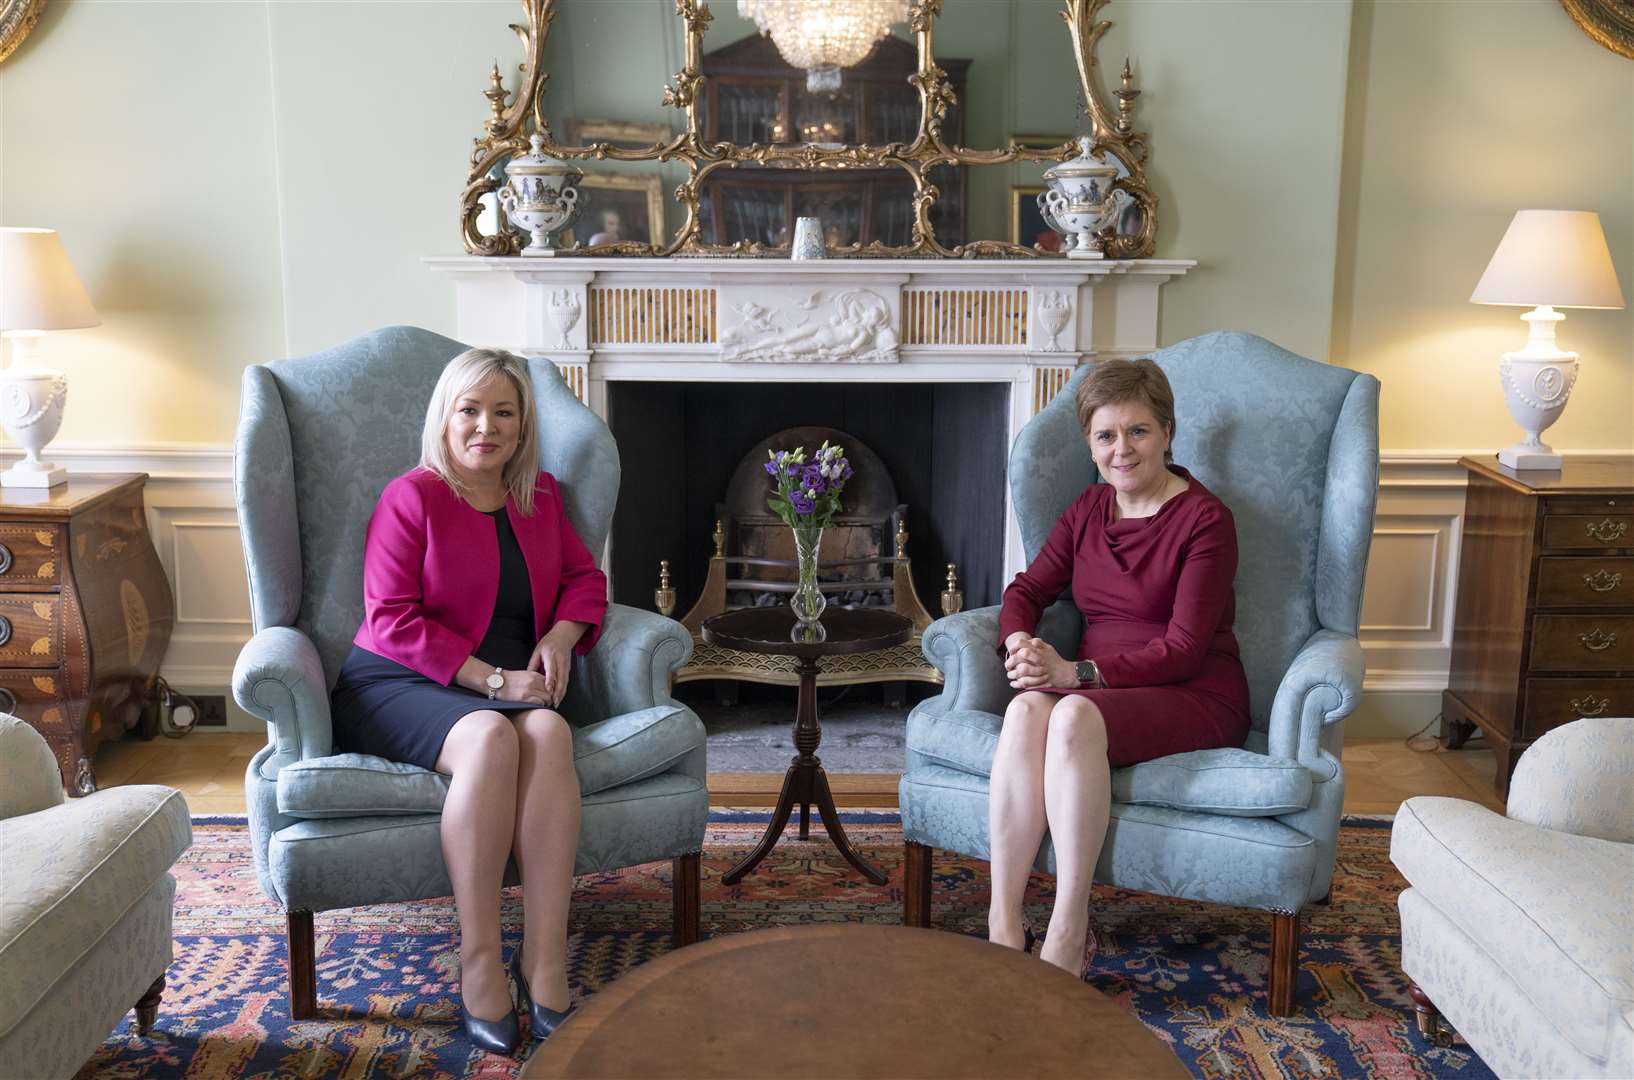 First Minister Nicola Sturgeon, right, welcomed Sinn Fein vice-president Michelle O’Neill to Bute House in Edinburgh on Friday (Jane Barlow/PA)